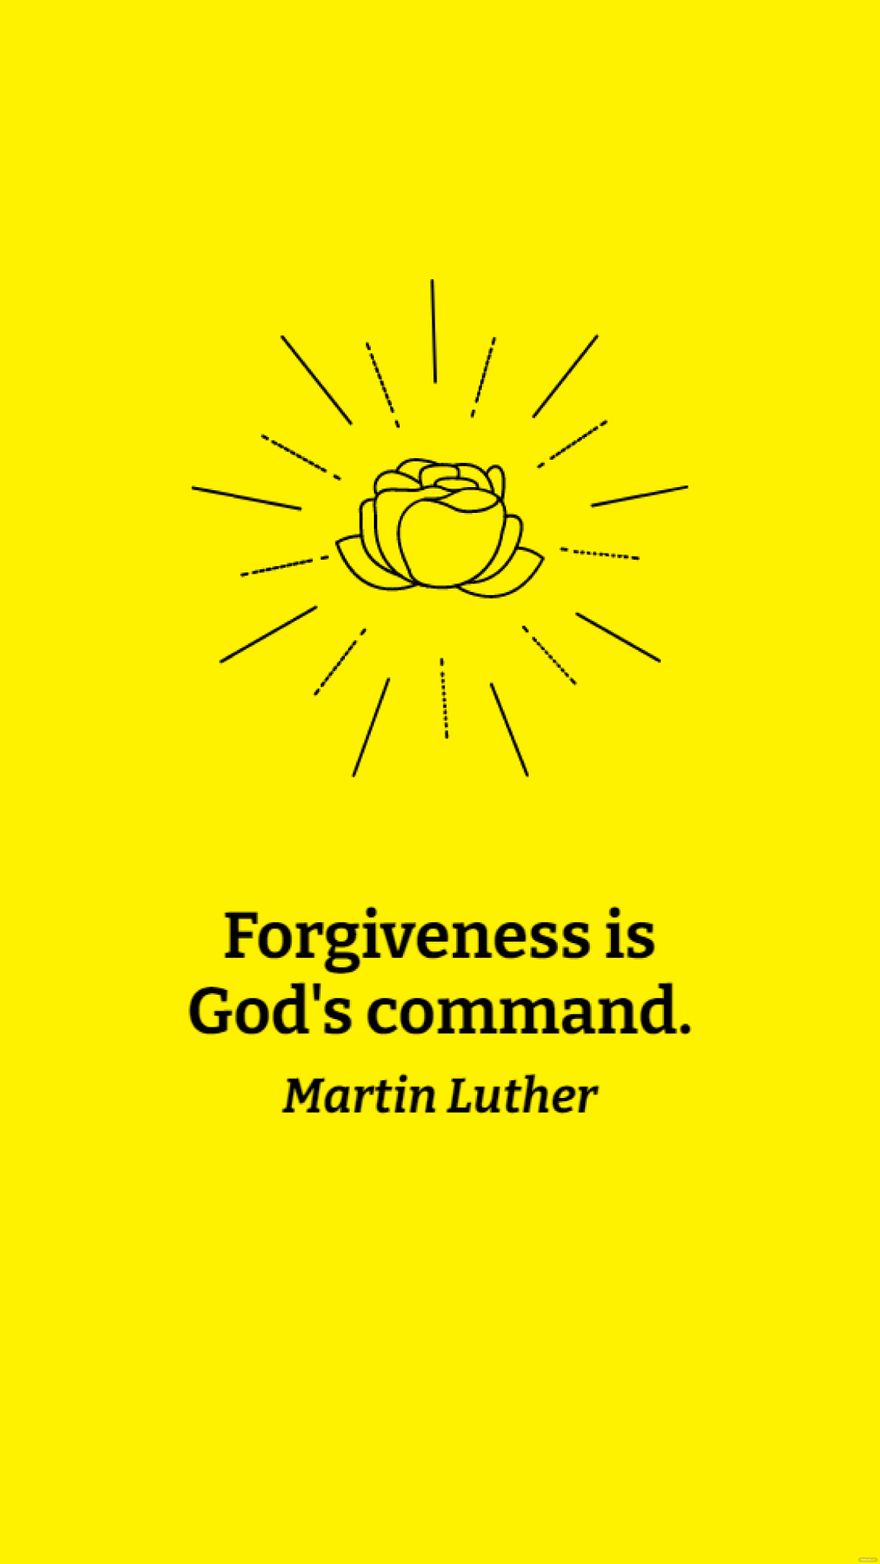 Free Martin Luther - Forgiveness is God's command. in JPG